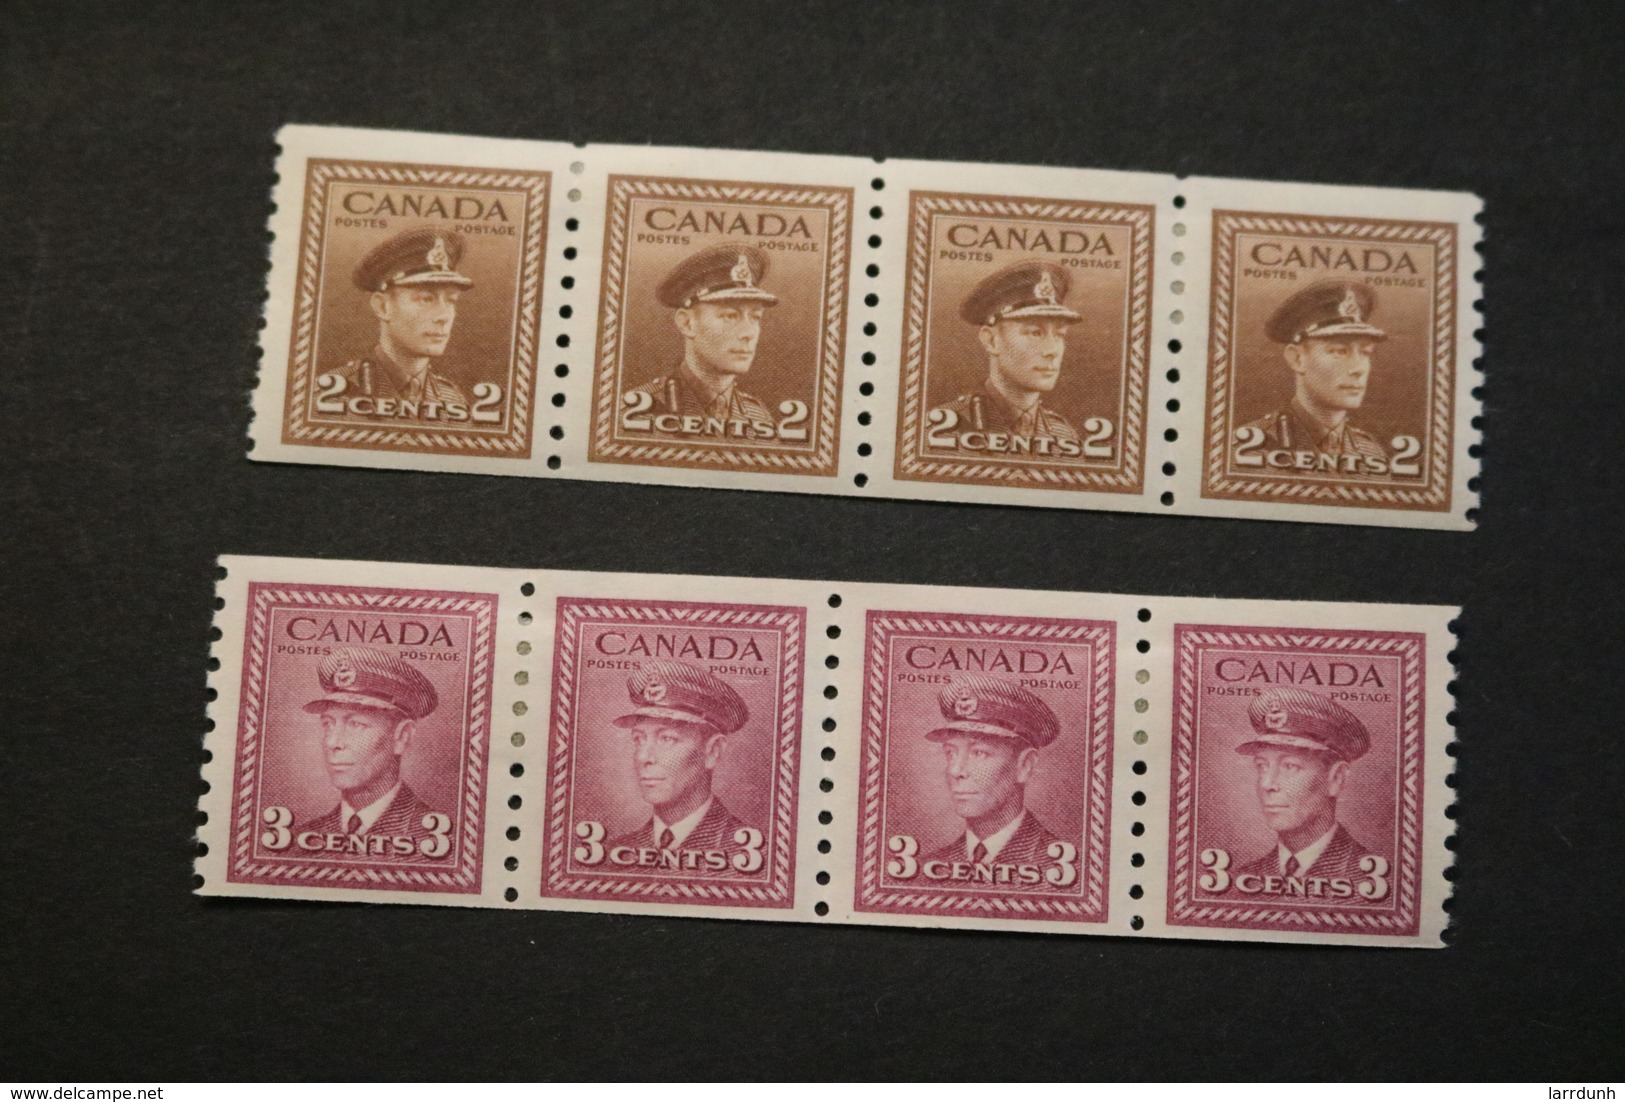 Canada 264 266 KGVI Strips Of Four Hinge Remnants 1942-43 WYSIWYG  A04s - Coil Stamps